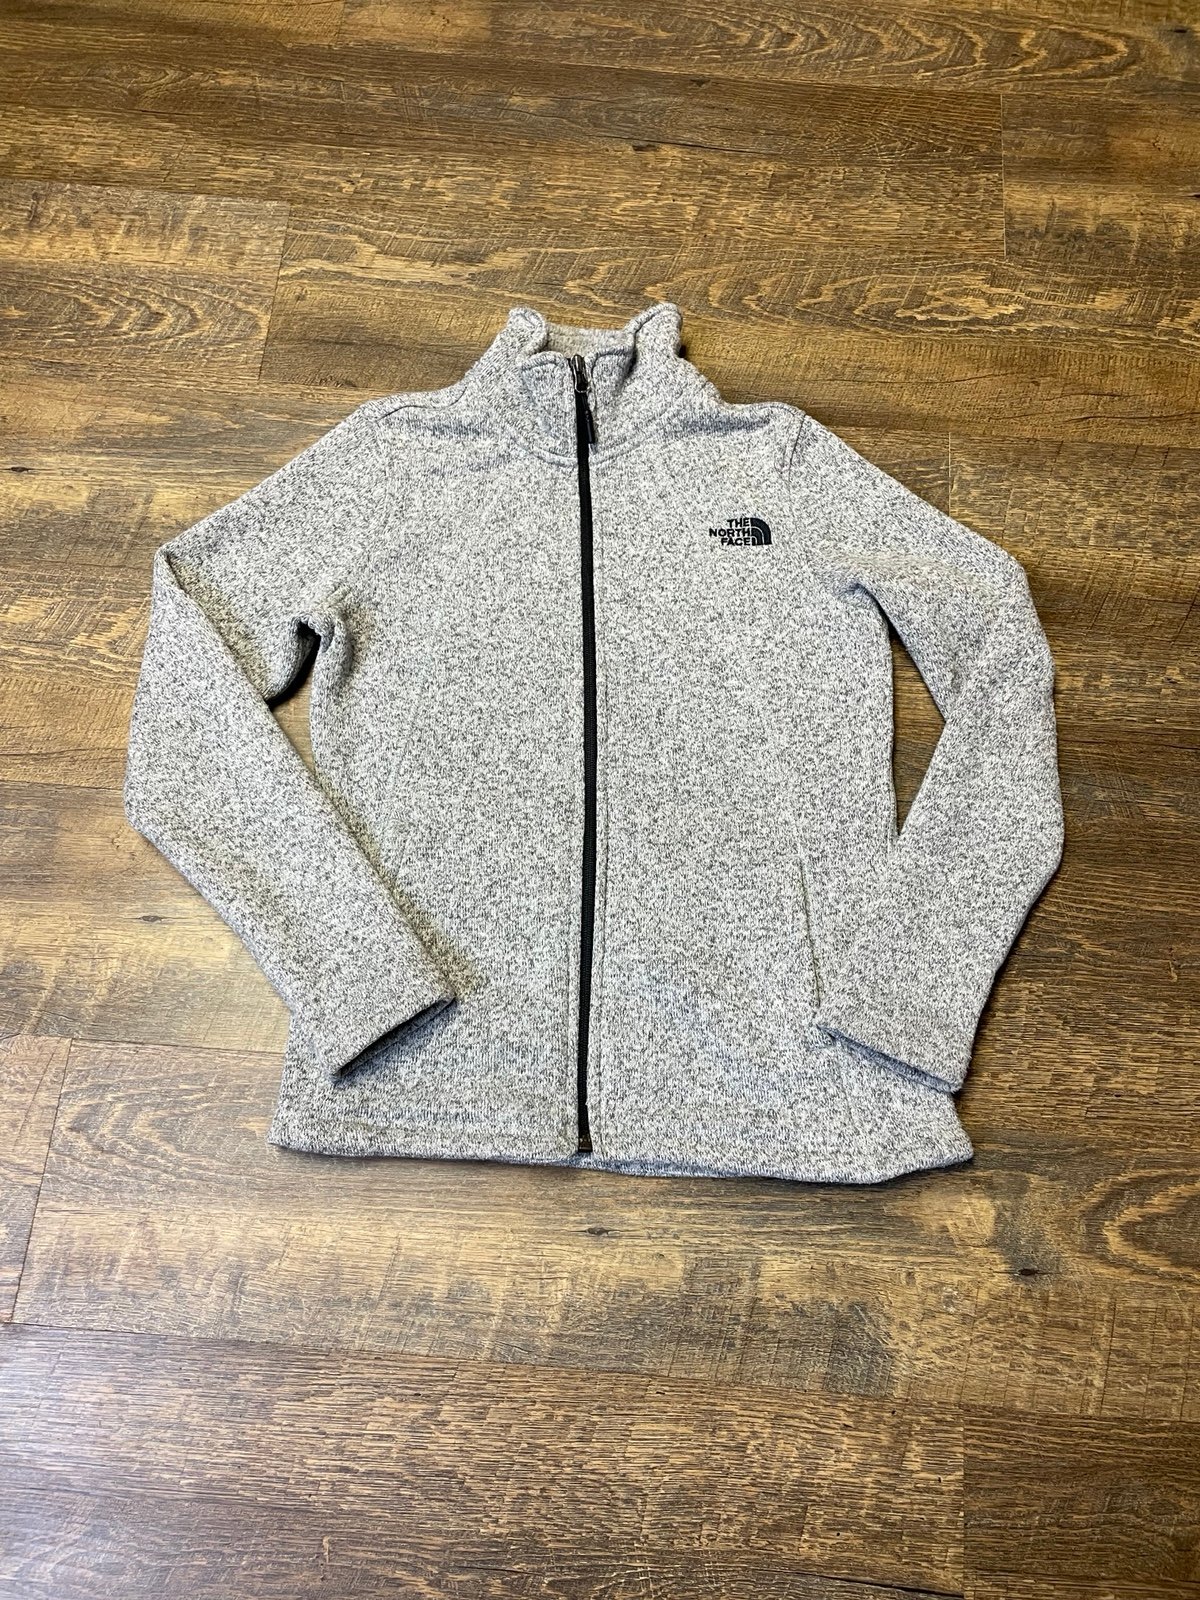 Classic The North Face Gray Full Zip Fleece Jacket Wome